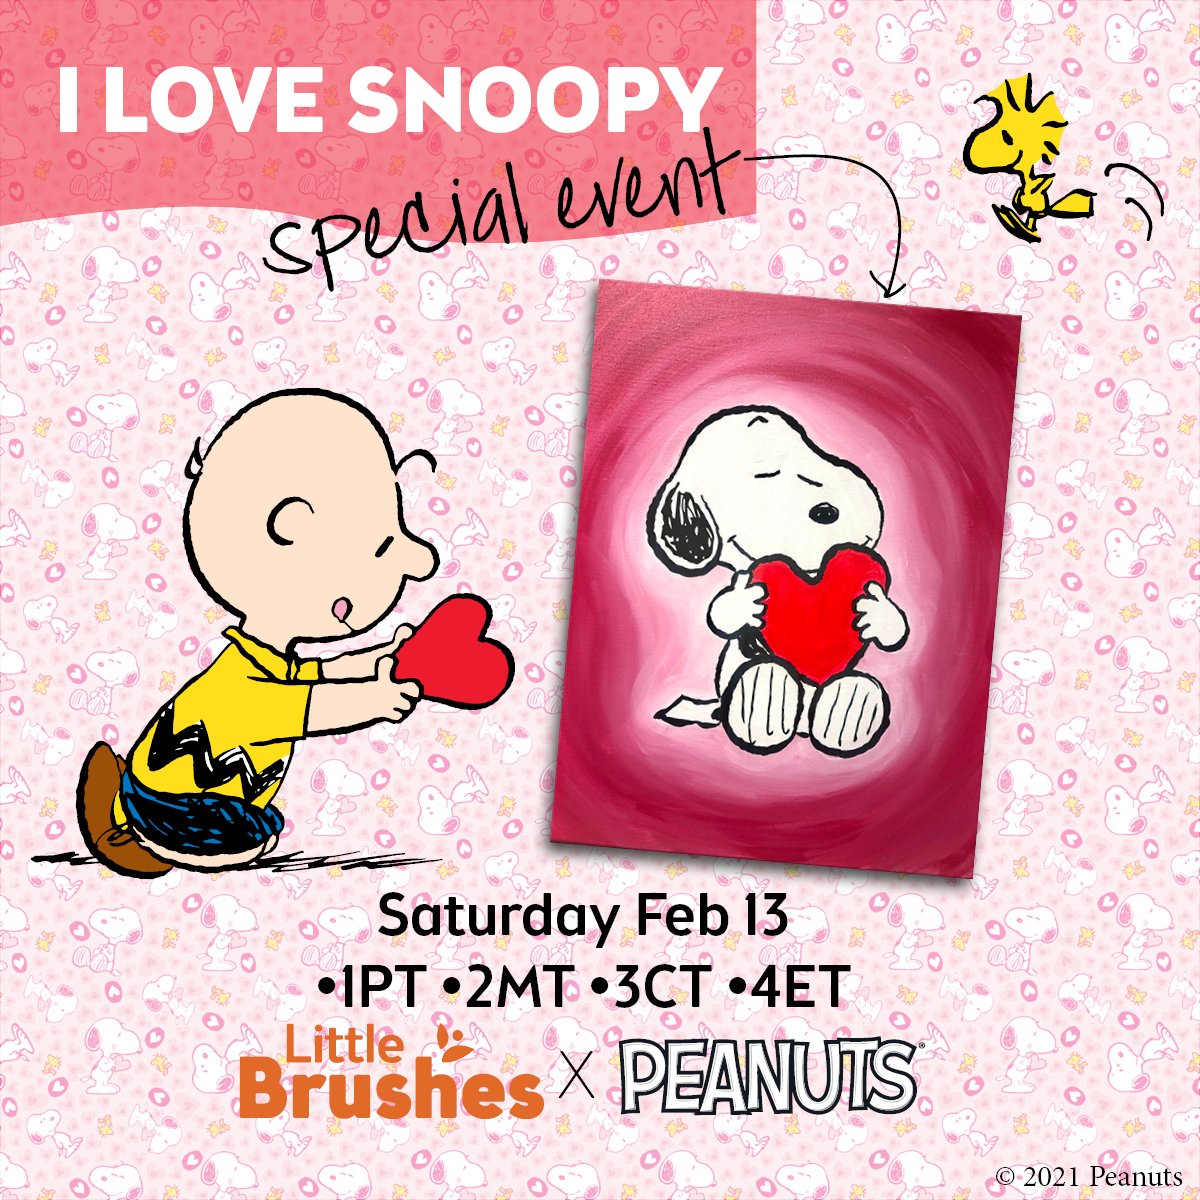 I Love Snoopy! Little Brushes Special Event